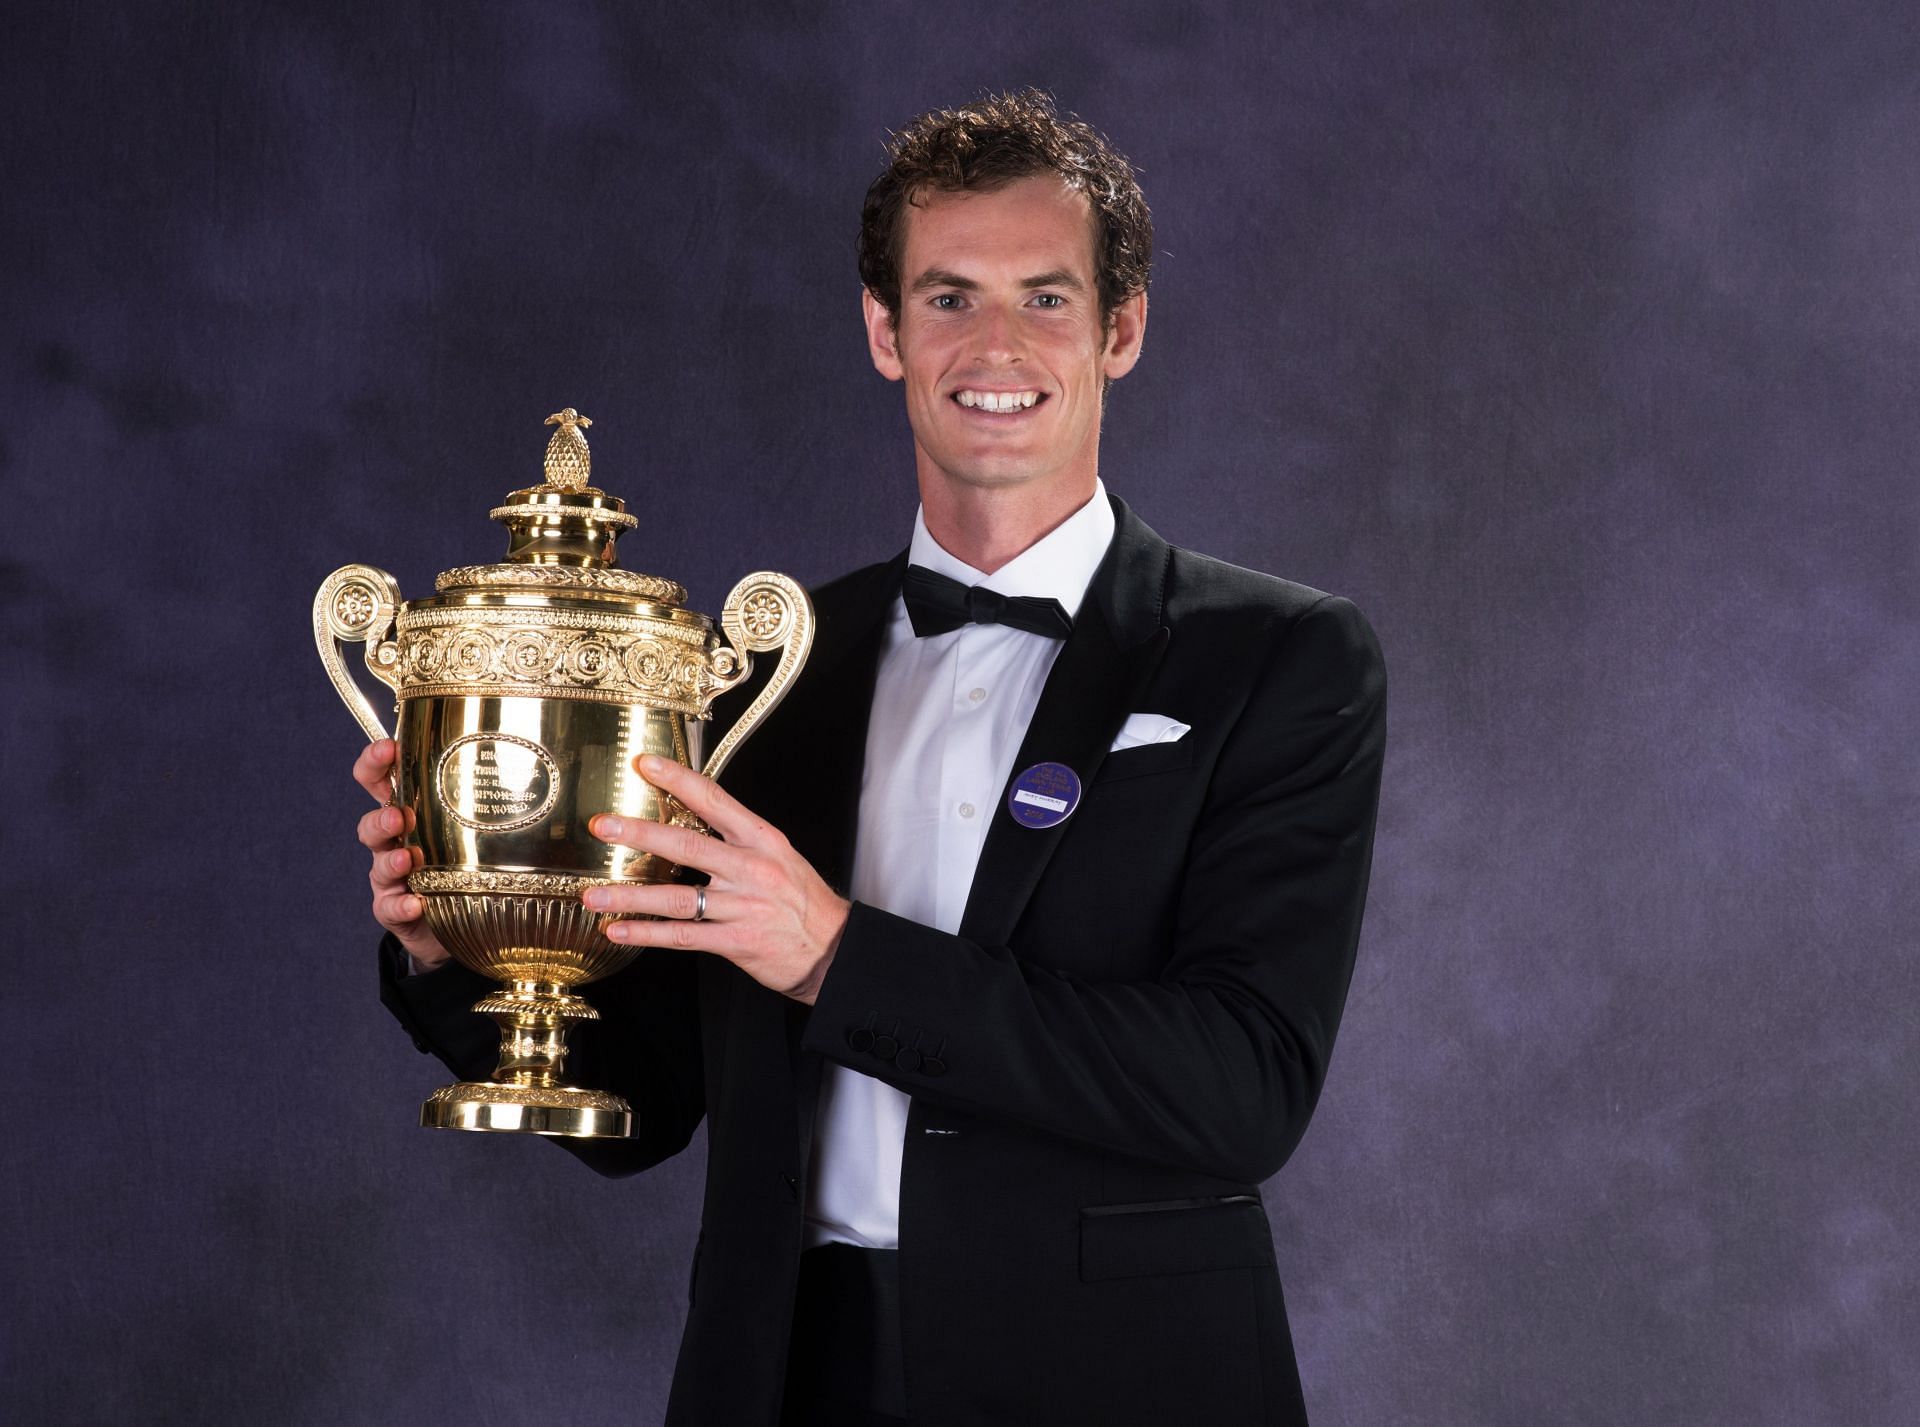 Murray with the trophy at Wimbledon 2016